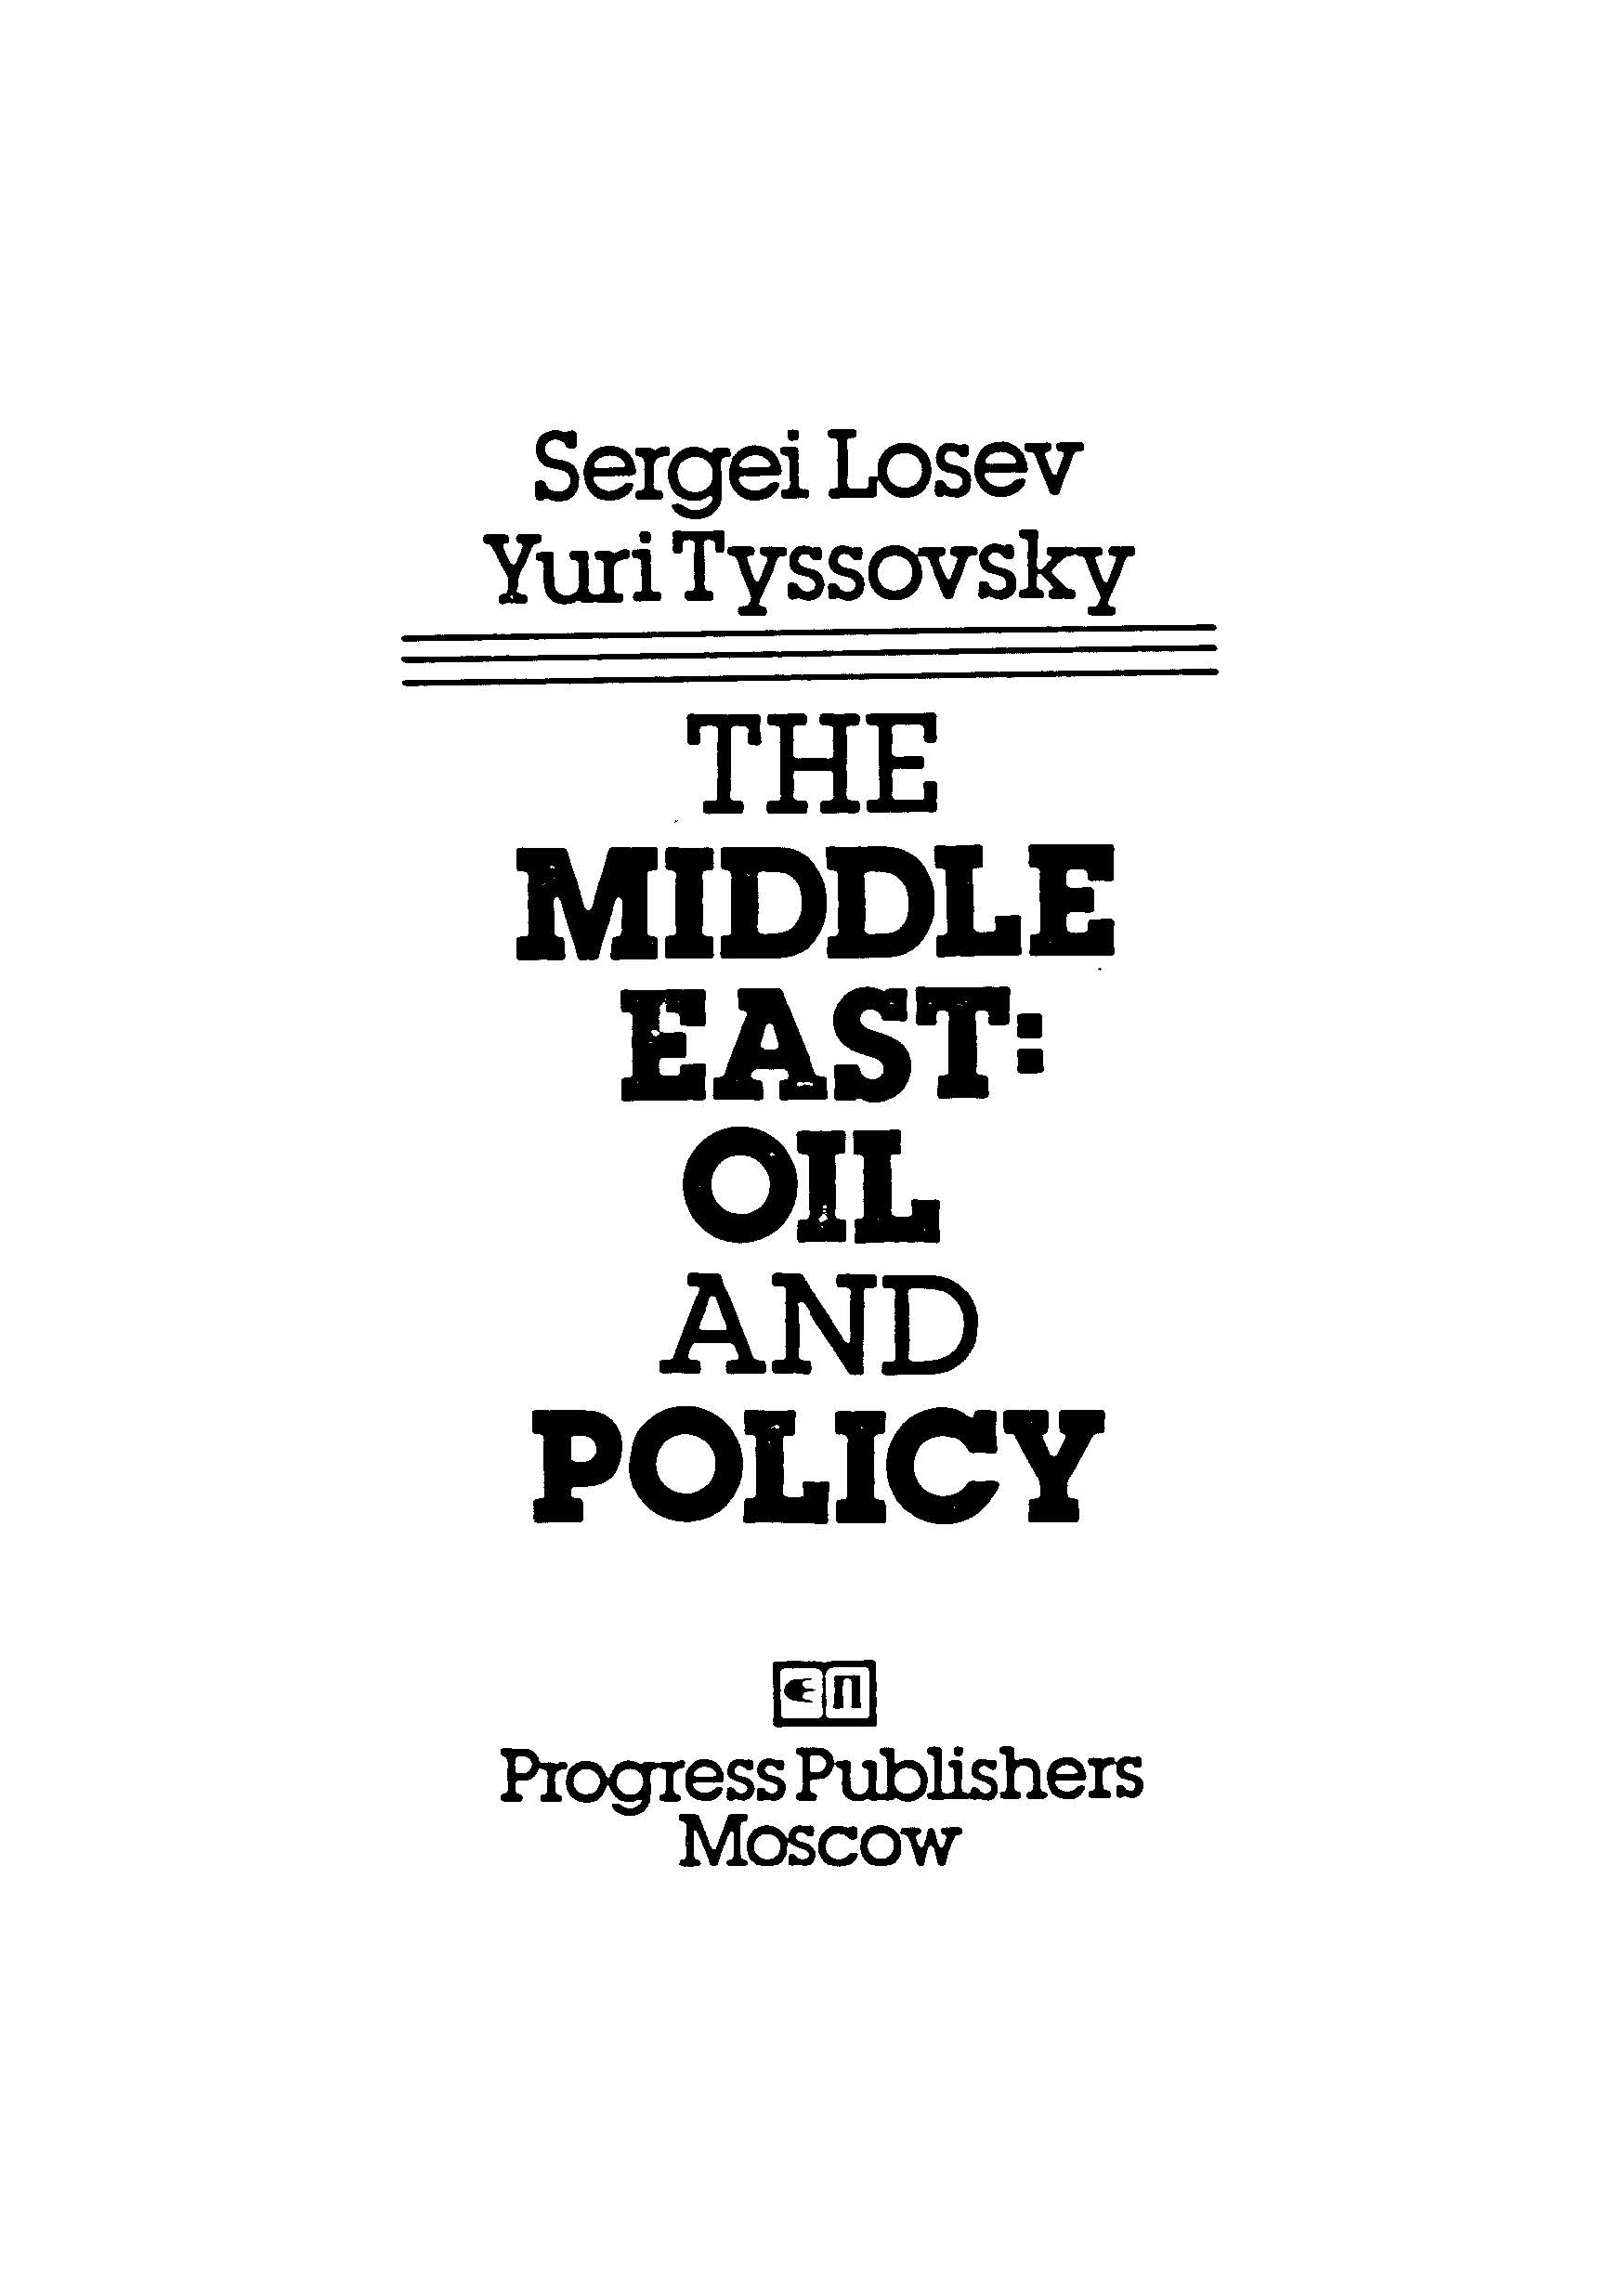 The middle east;oil and policy